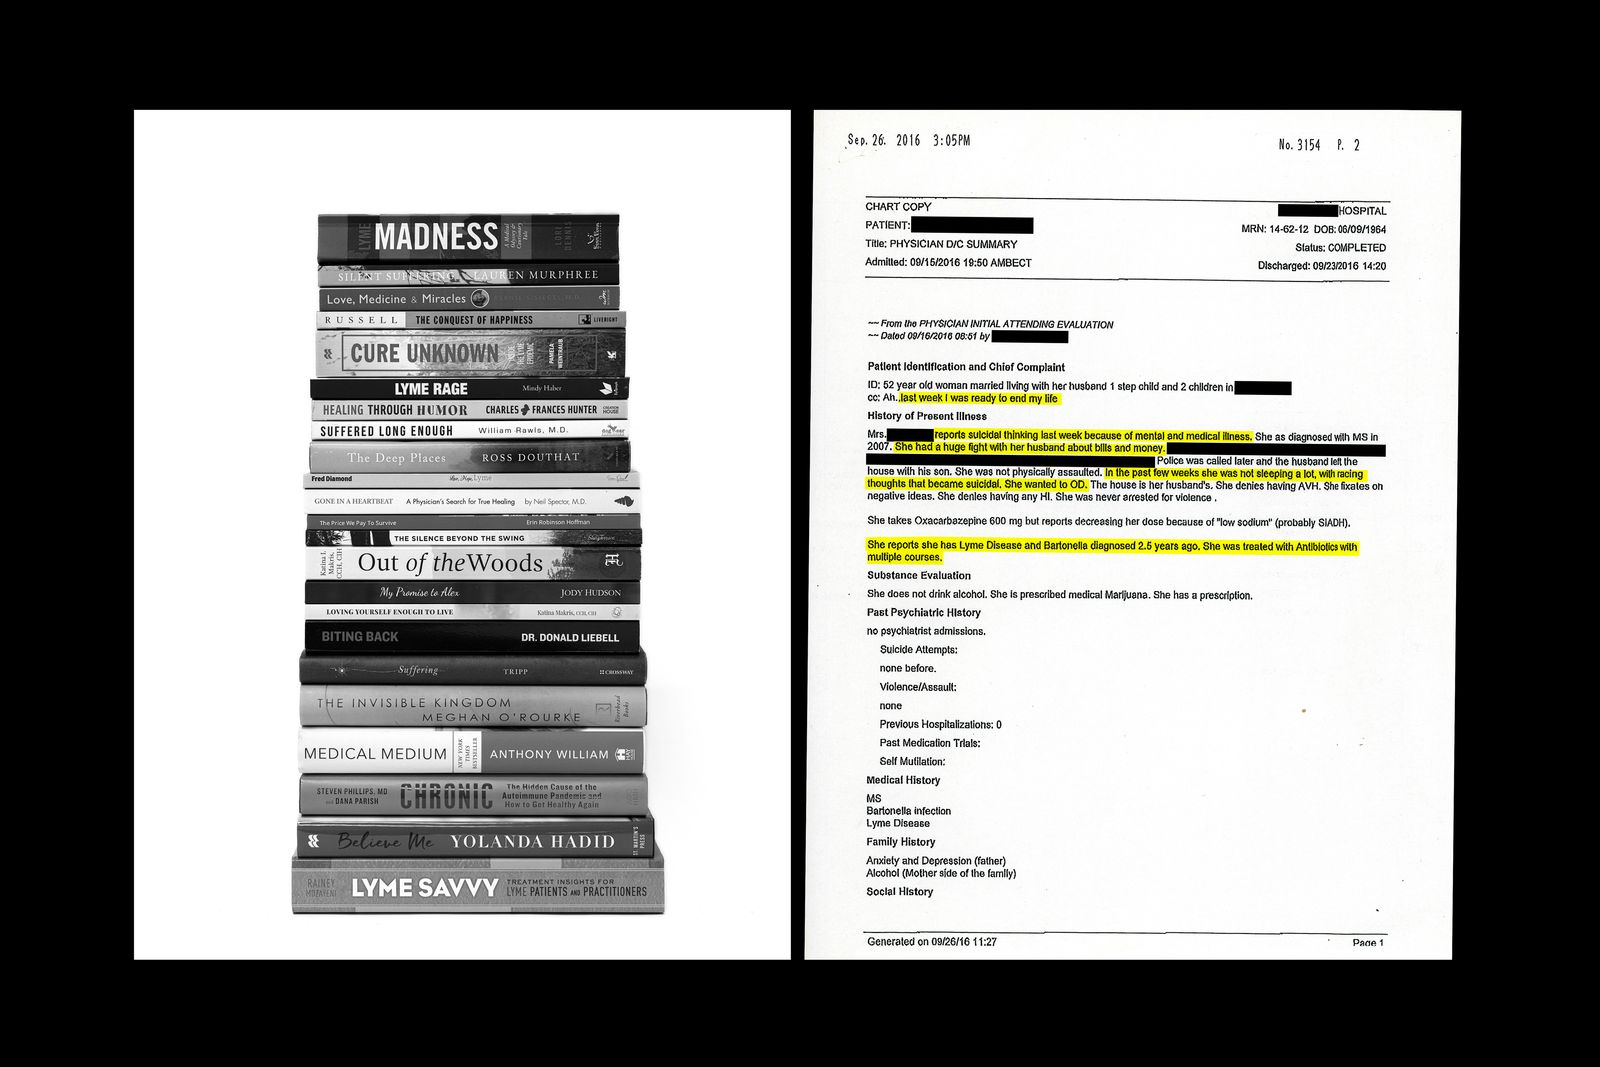 © jiatong lu - Sue's collection of books related to Lyme disease and her medical report.